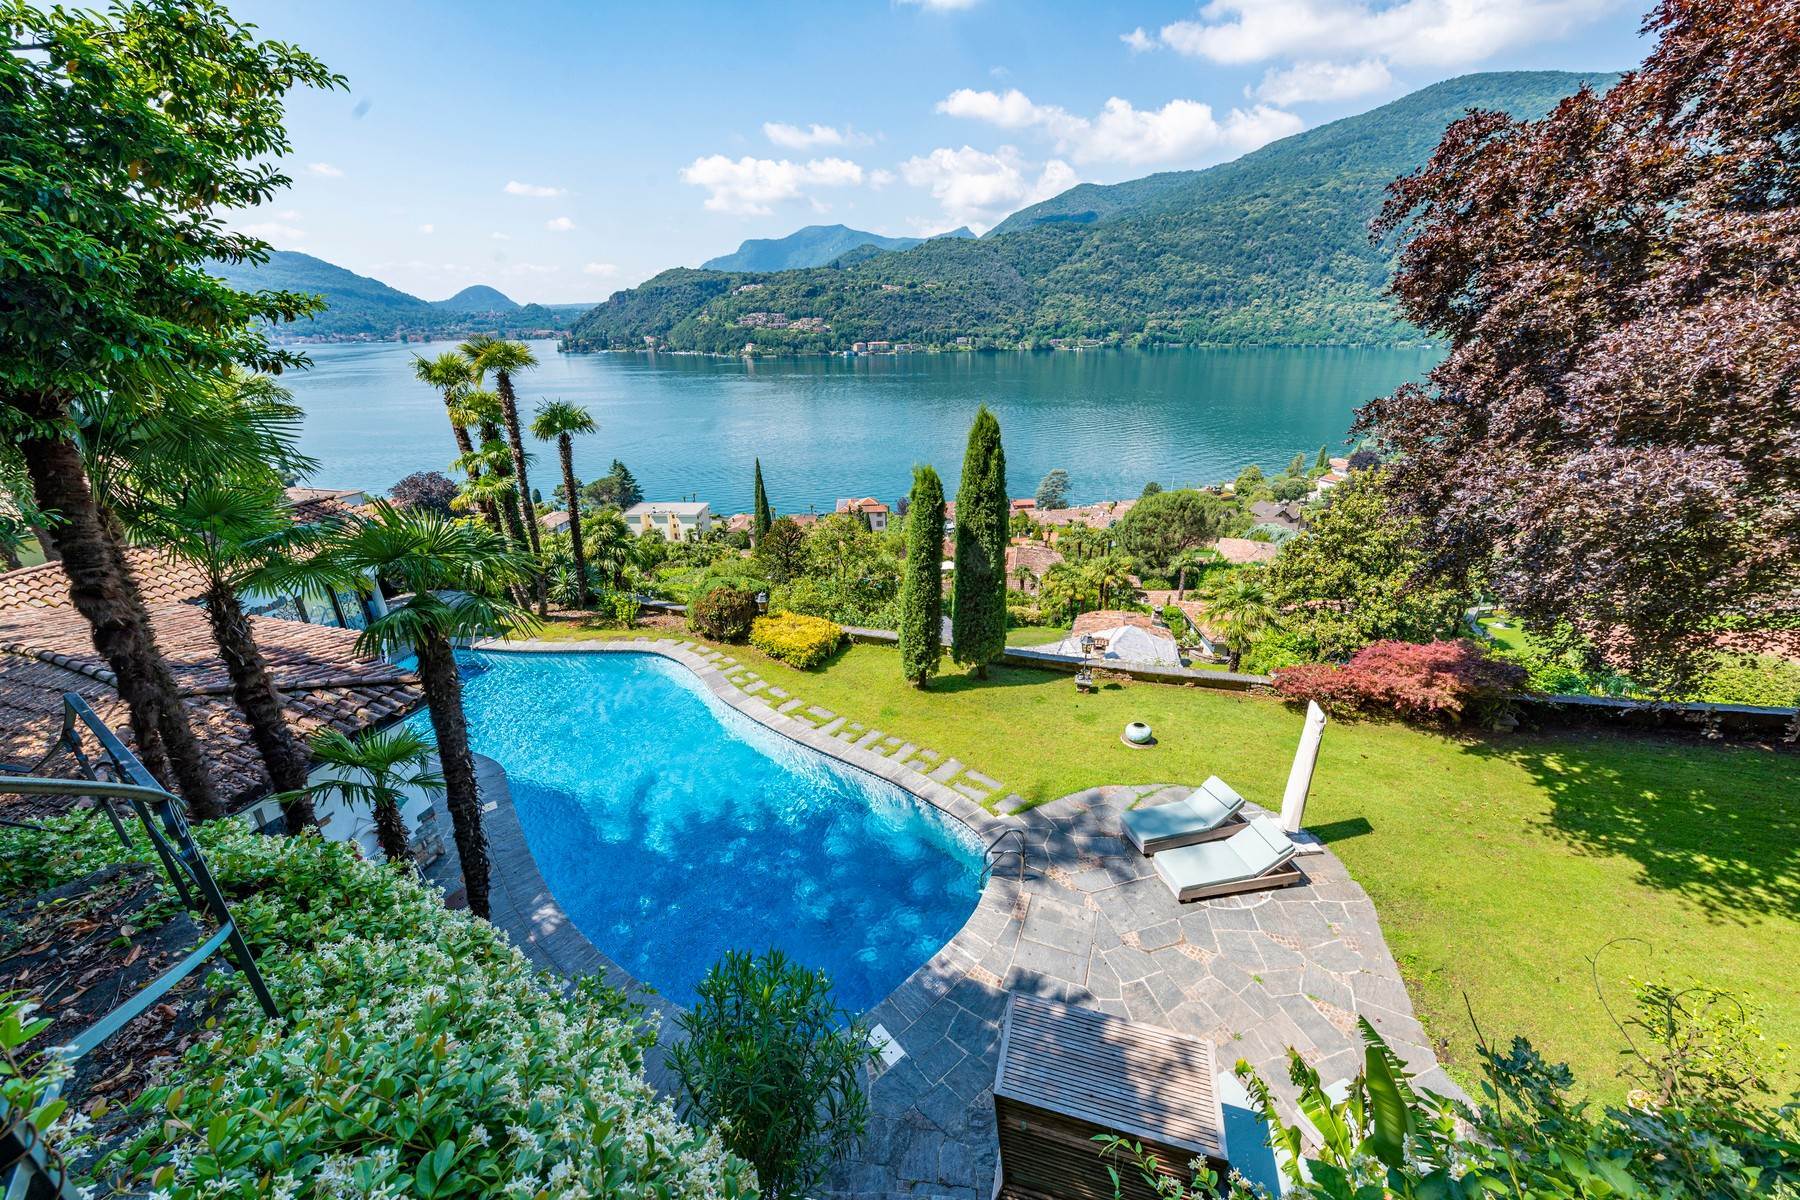 Single Family Homes for Sale at Villa La Sorgente: beautiful property with two boat houses Morcote Morcote, Ticino 6922 Switzerland